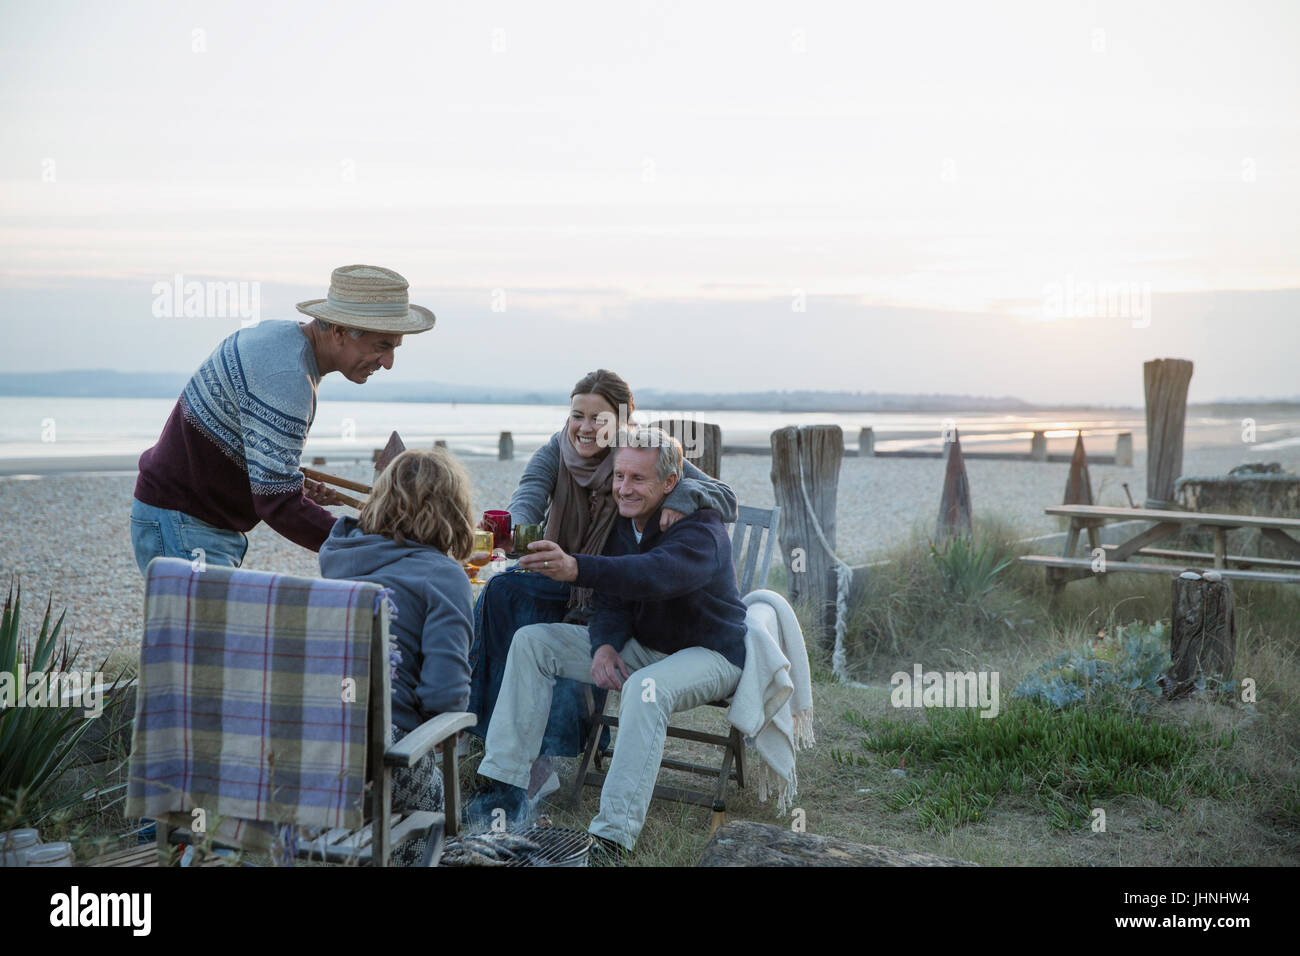 Mature couples barbecuing, drinking wine on sunset beach Stock Photo